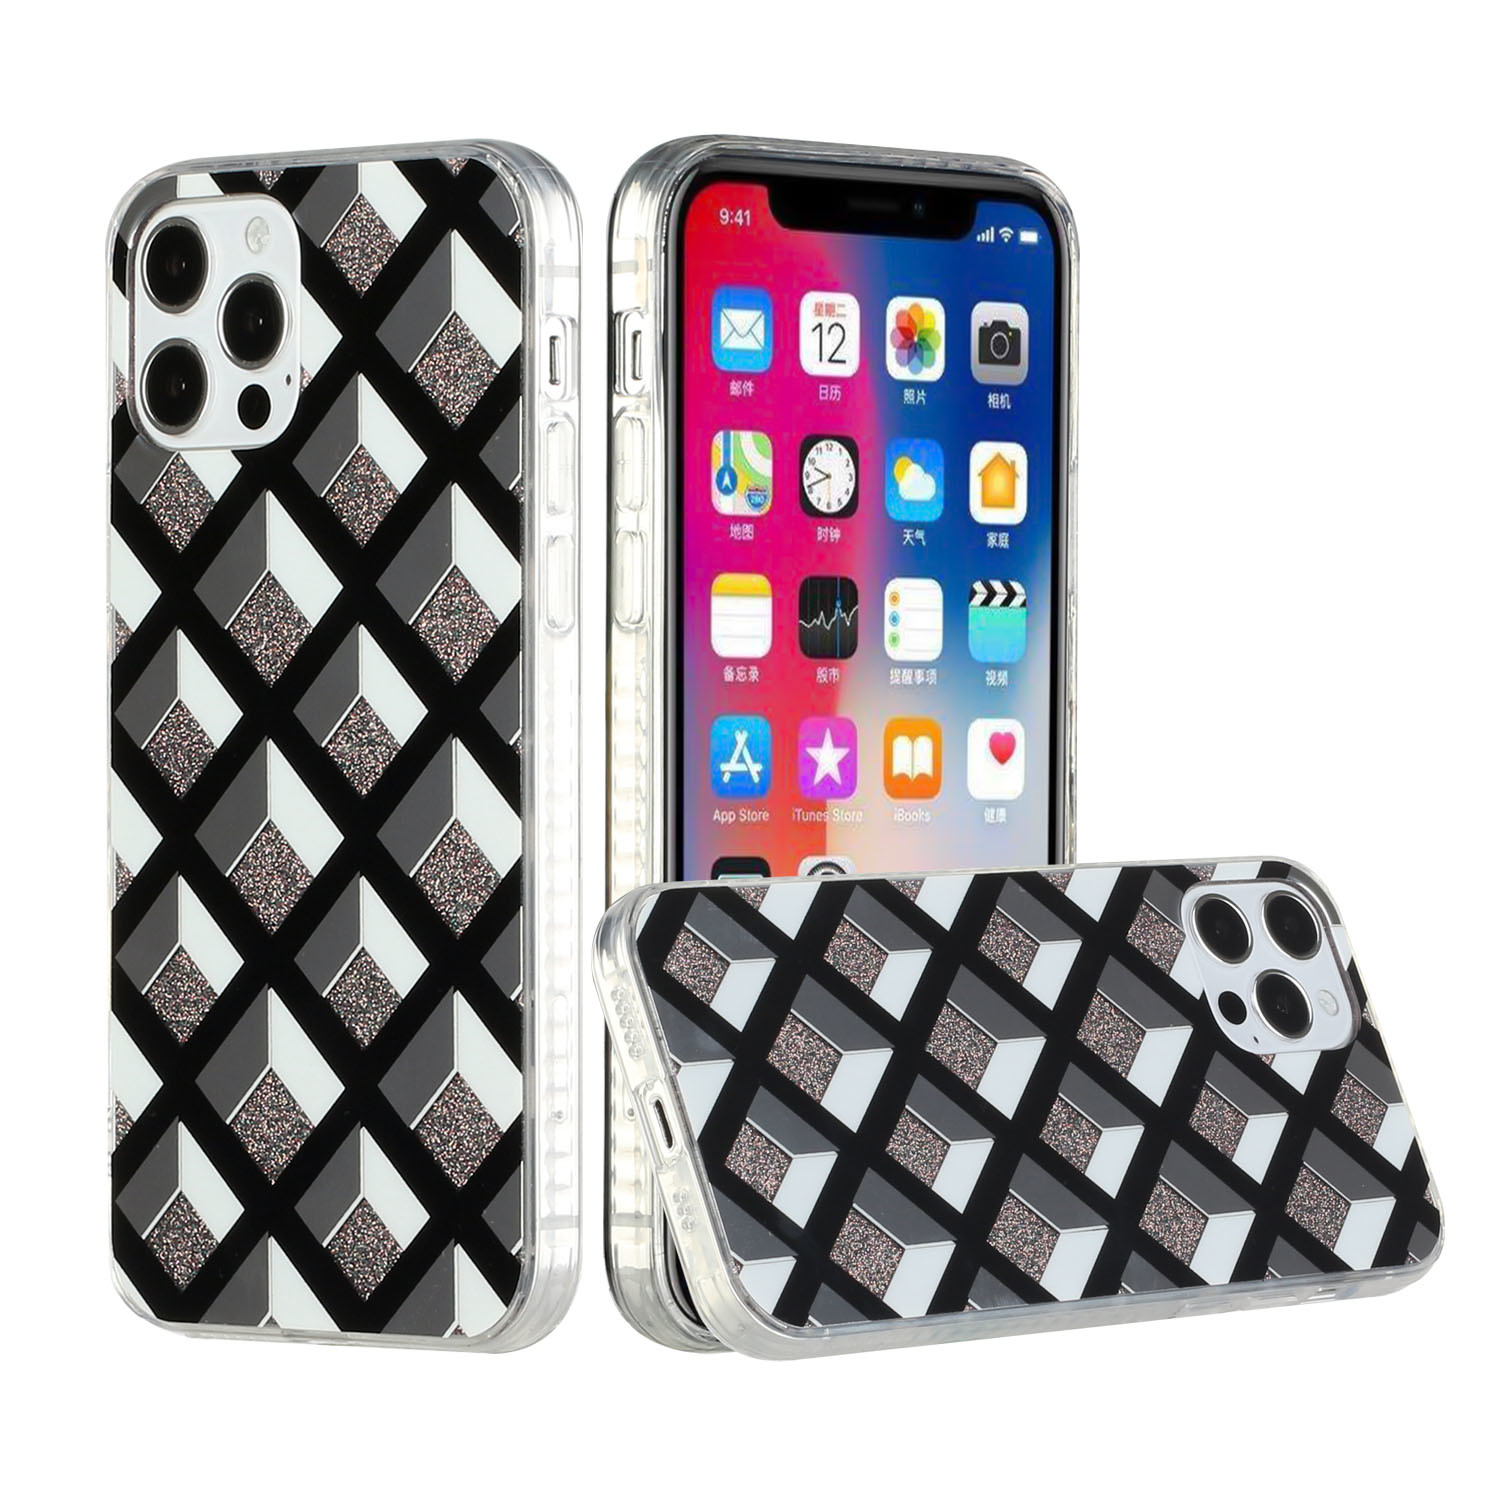 For Apple iPhone 12 Pro Max 6.7 3D Grid Electroplated Design Hybrid Case Cover